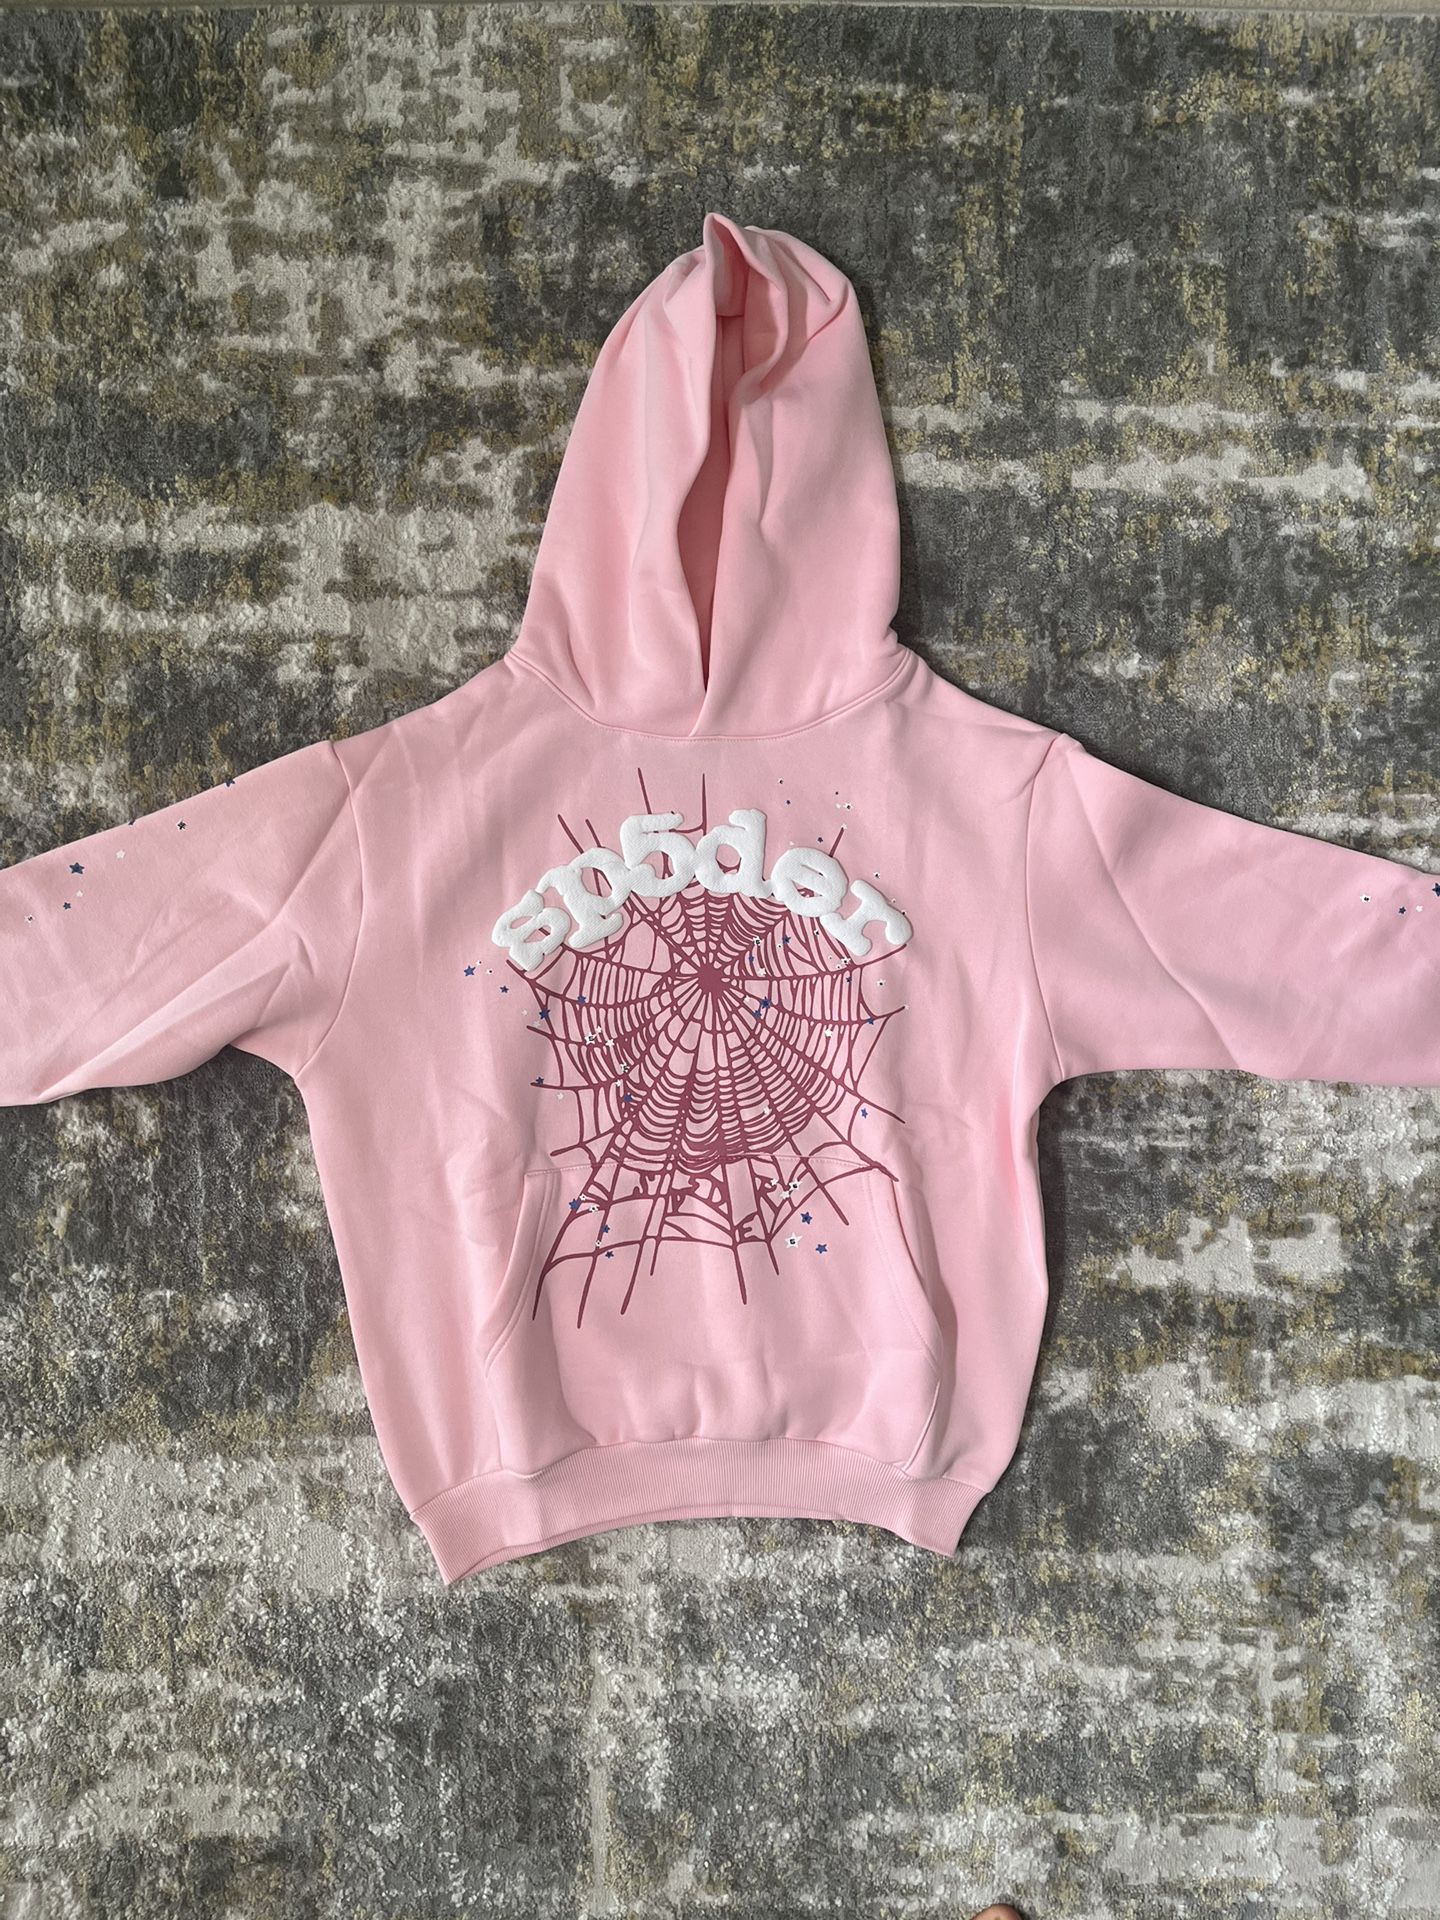 Pink SPYDER hoodie size Small